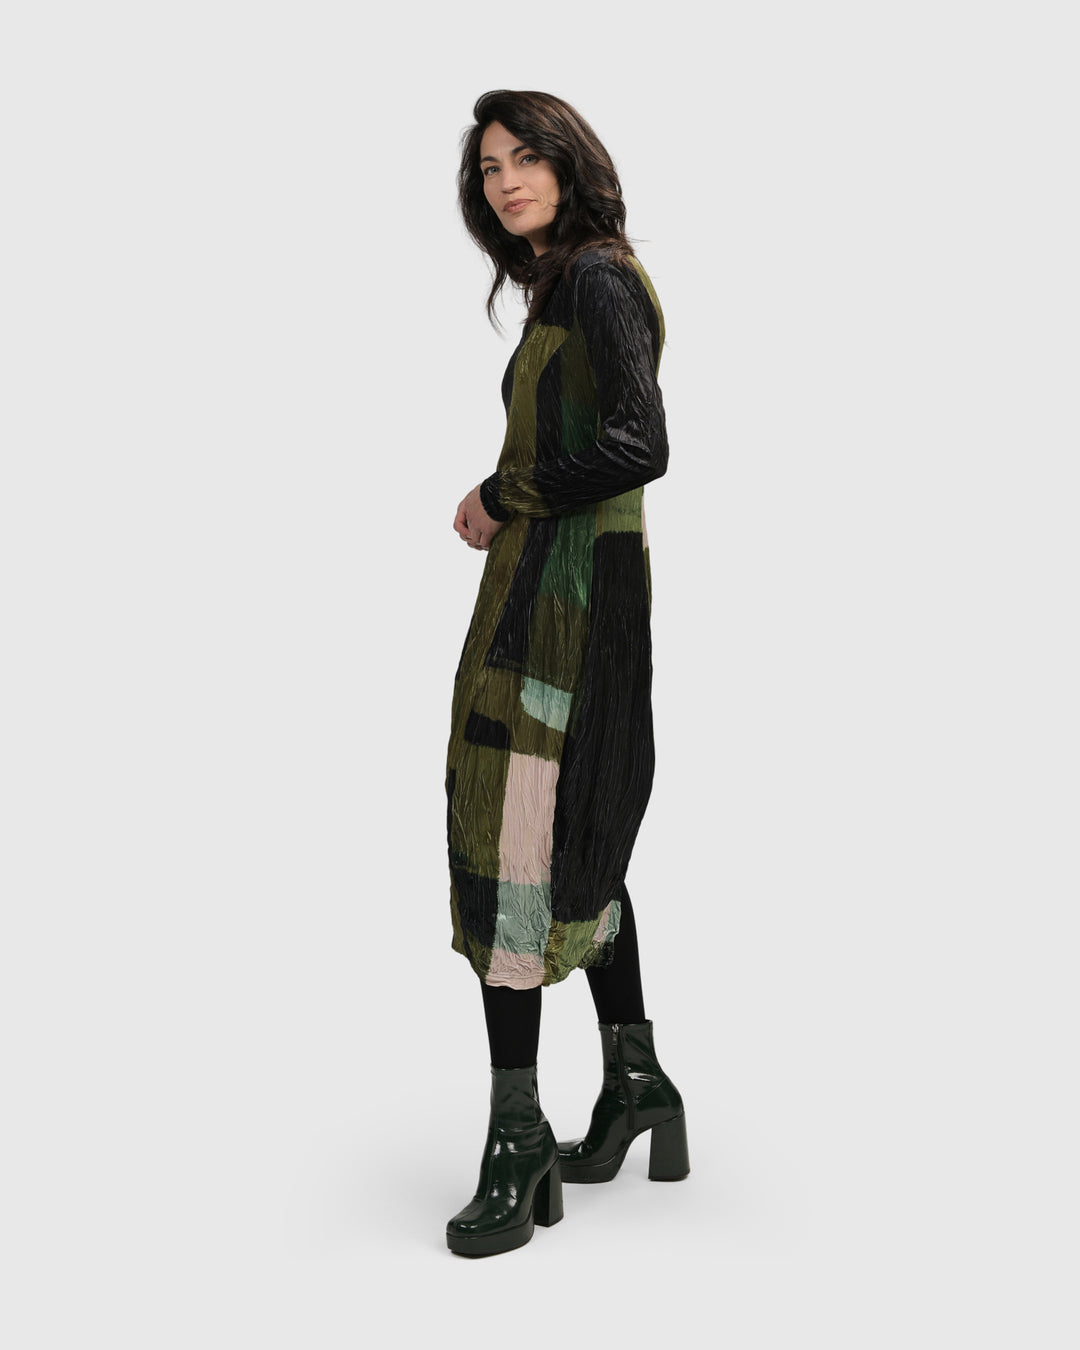 A woman wearing the ALEMBIKA Al Fresco Cocoon Dress in Olive, a knitted green and black dress that falls below-the-knee.